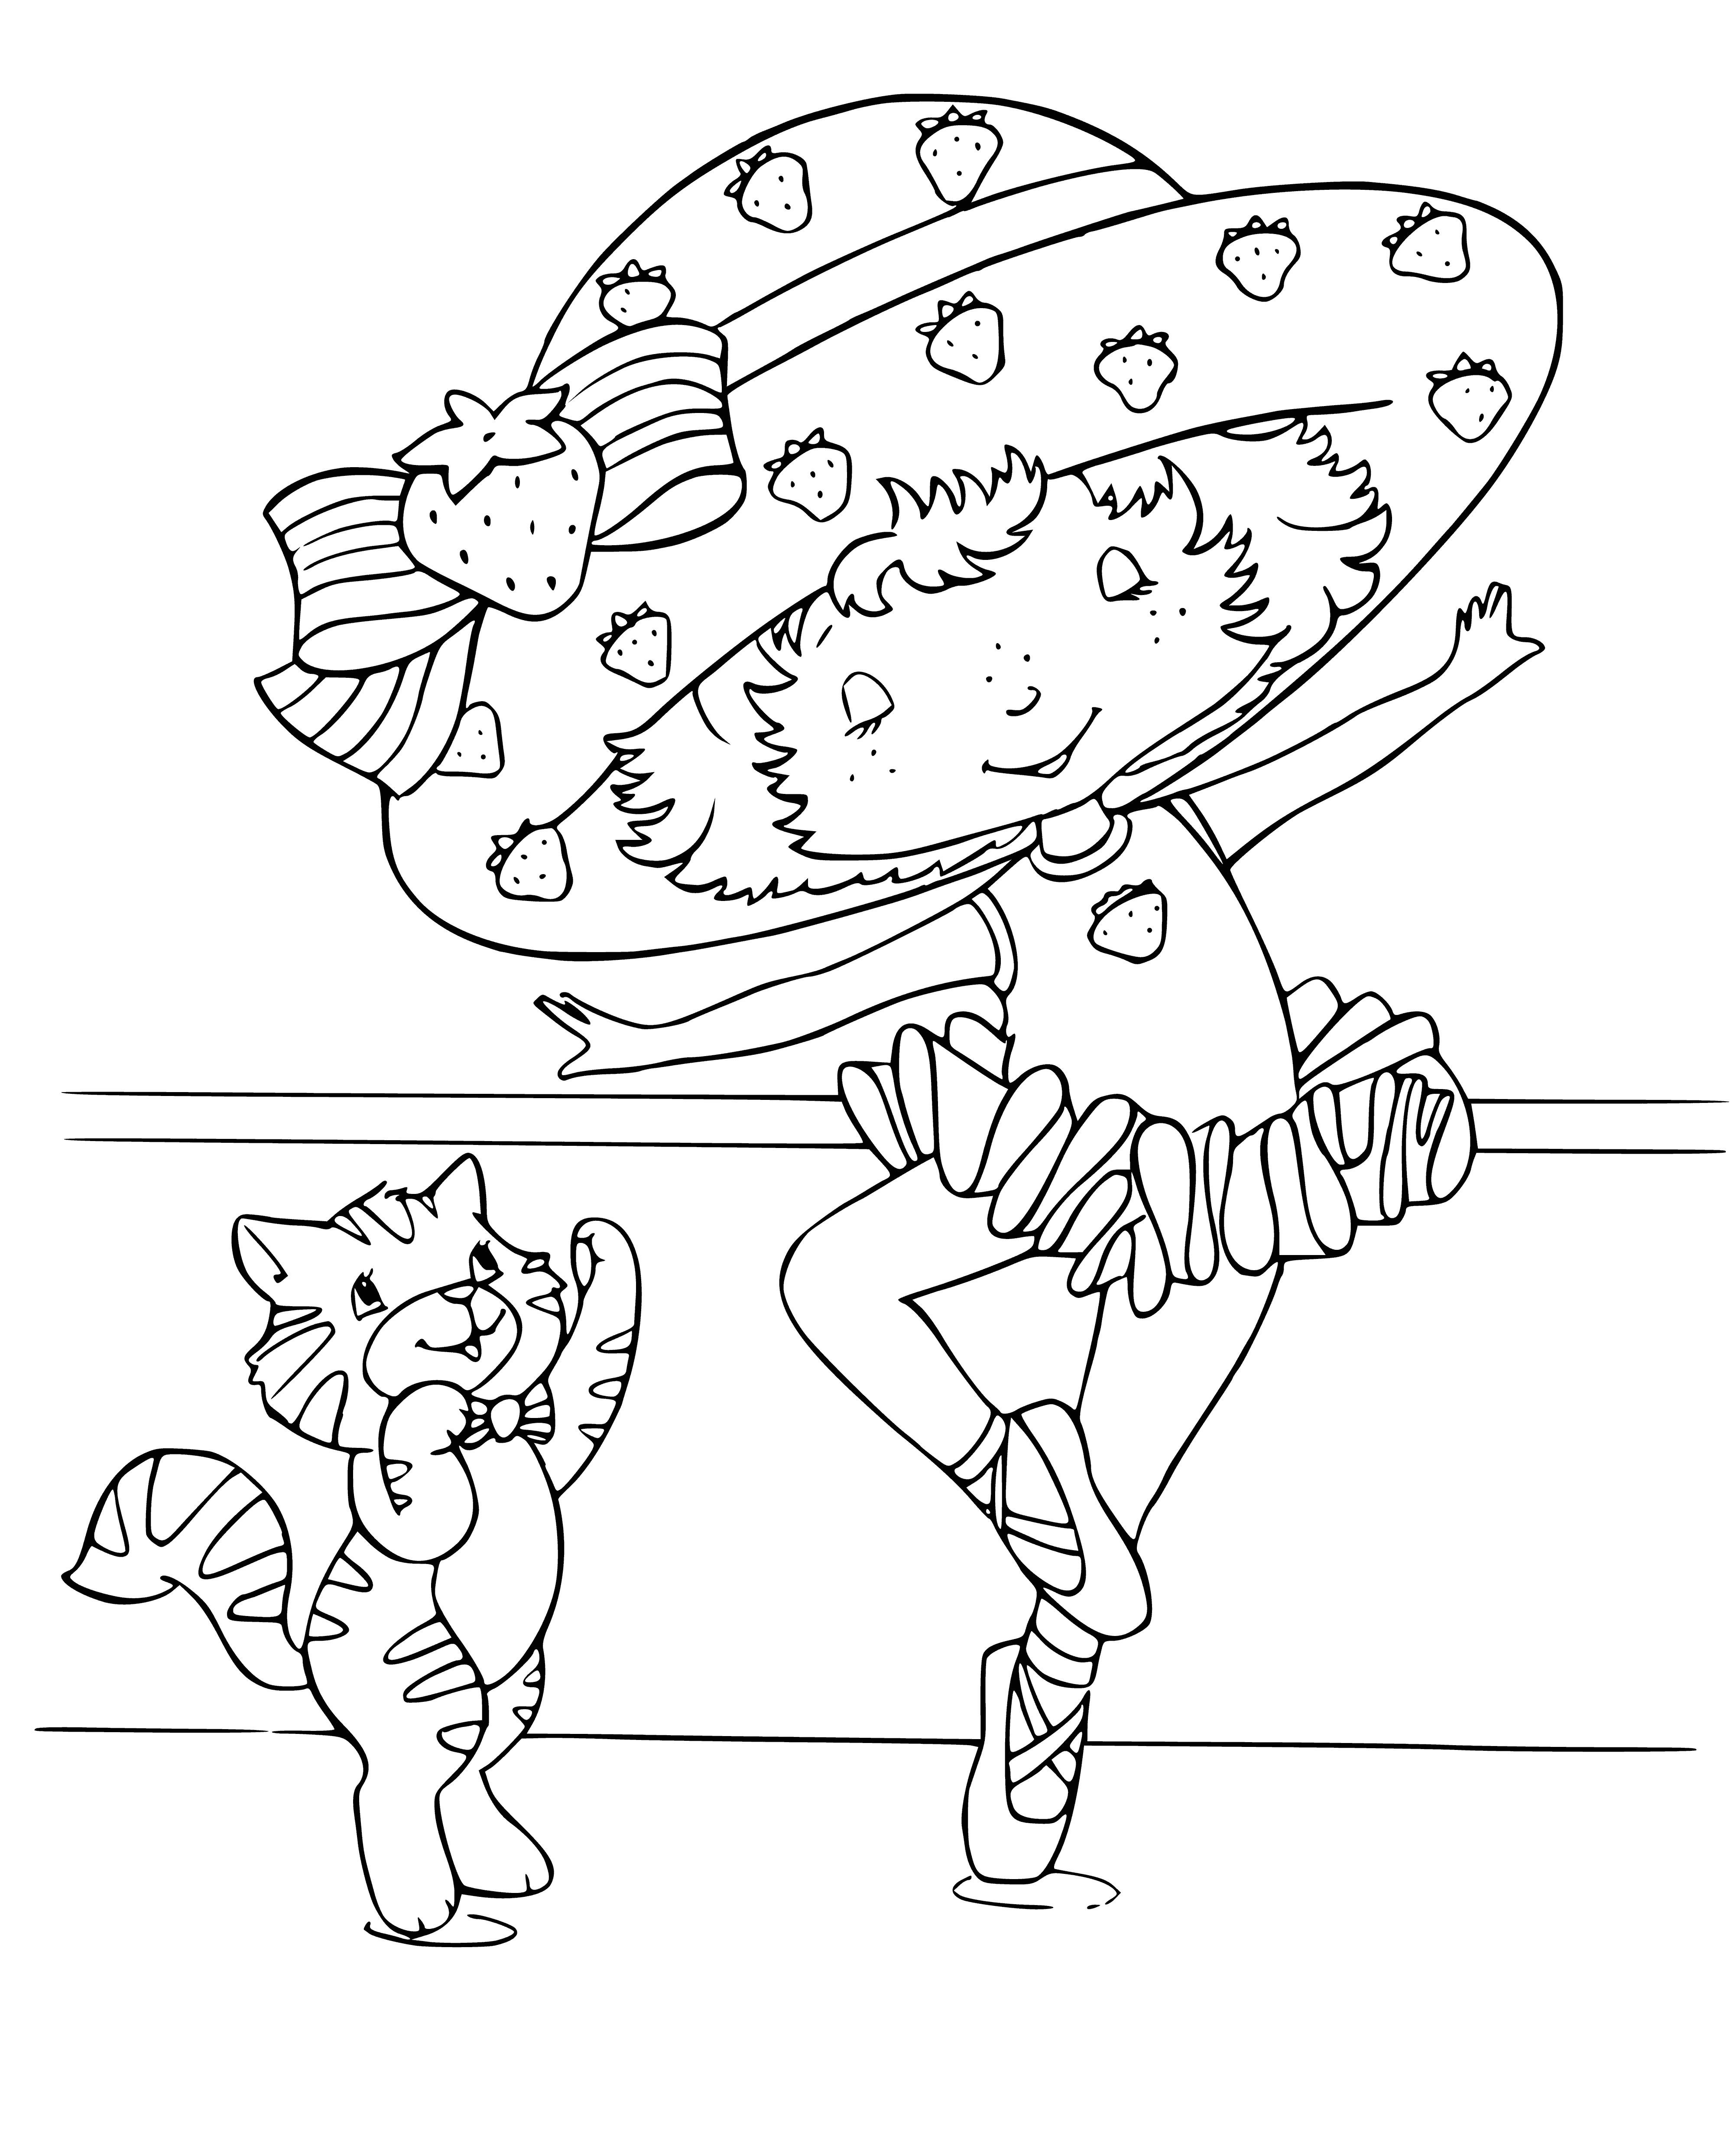 Ballerina girl coloring page